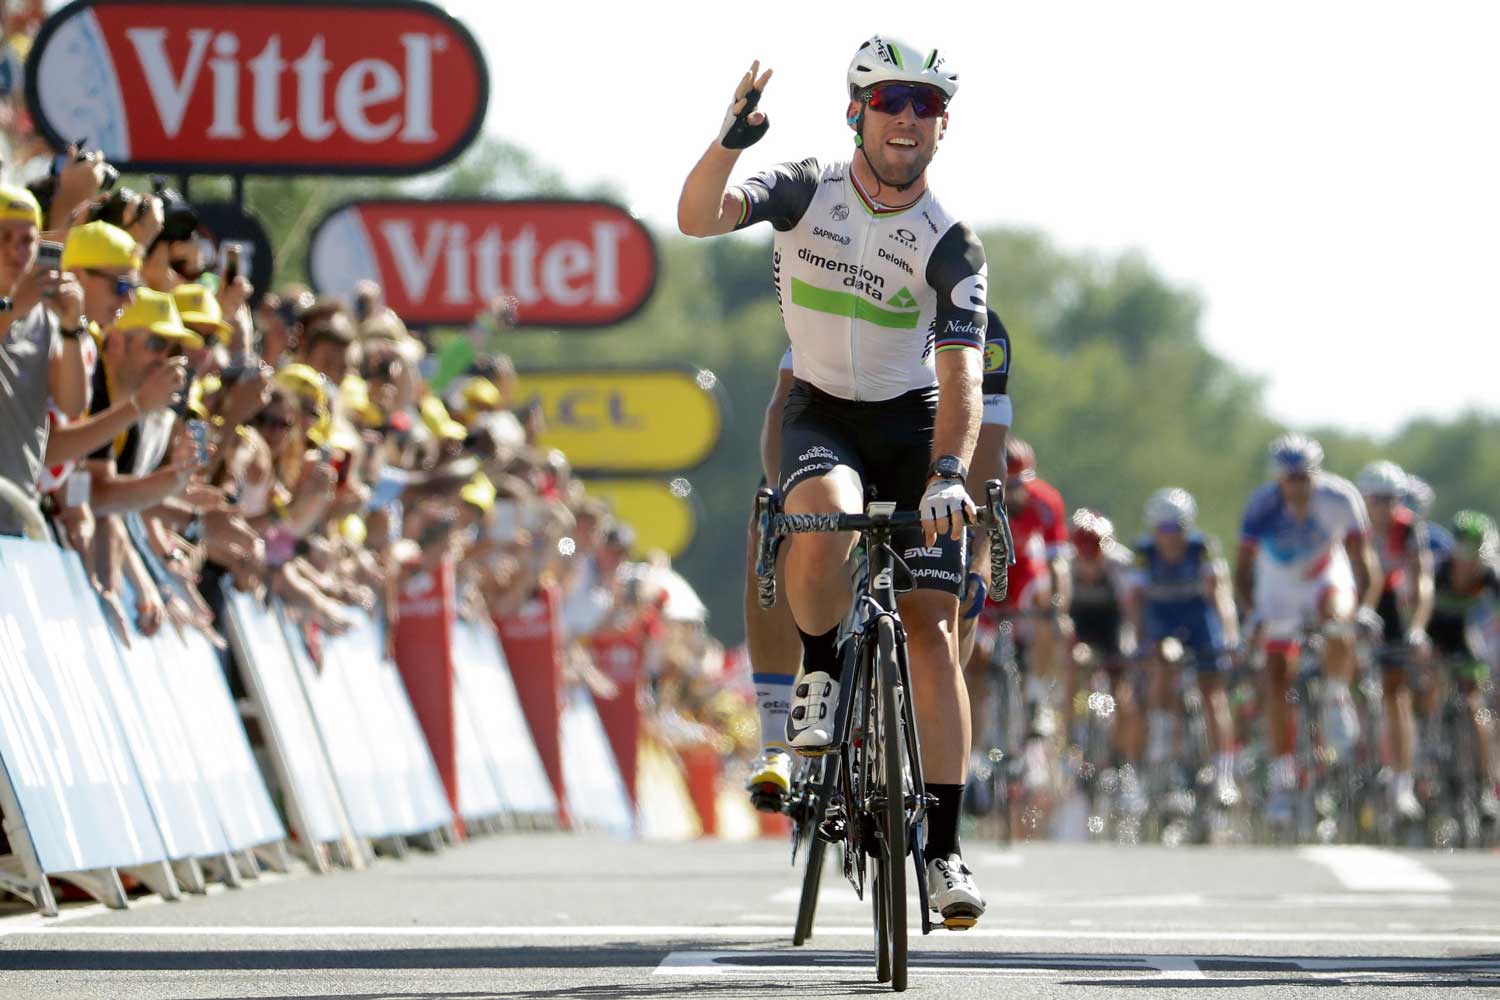 Mark Cavendish sprinting to his fourth stage win at stage 14 of the Tour de France 2016, his RM 011 Felipe Massa in carbon TPT, personally loaned to him by Richard Mille, on his wrist